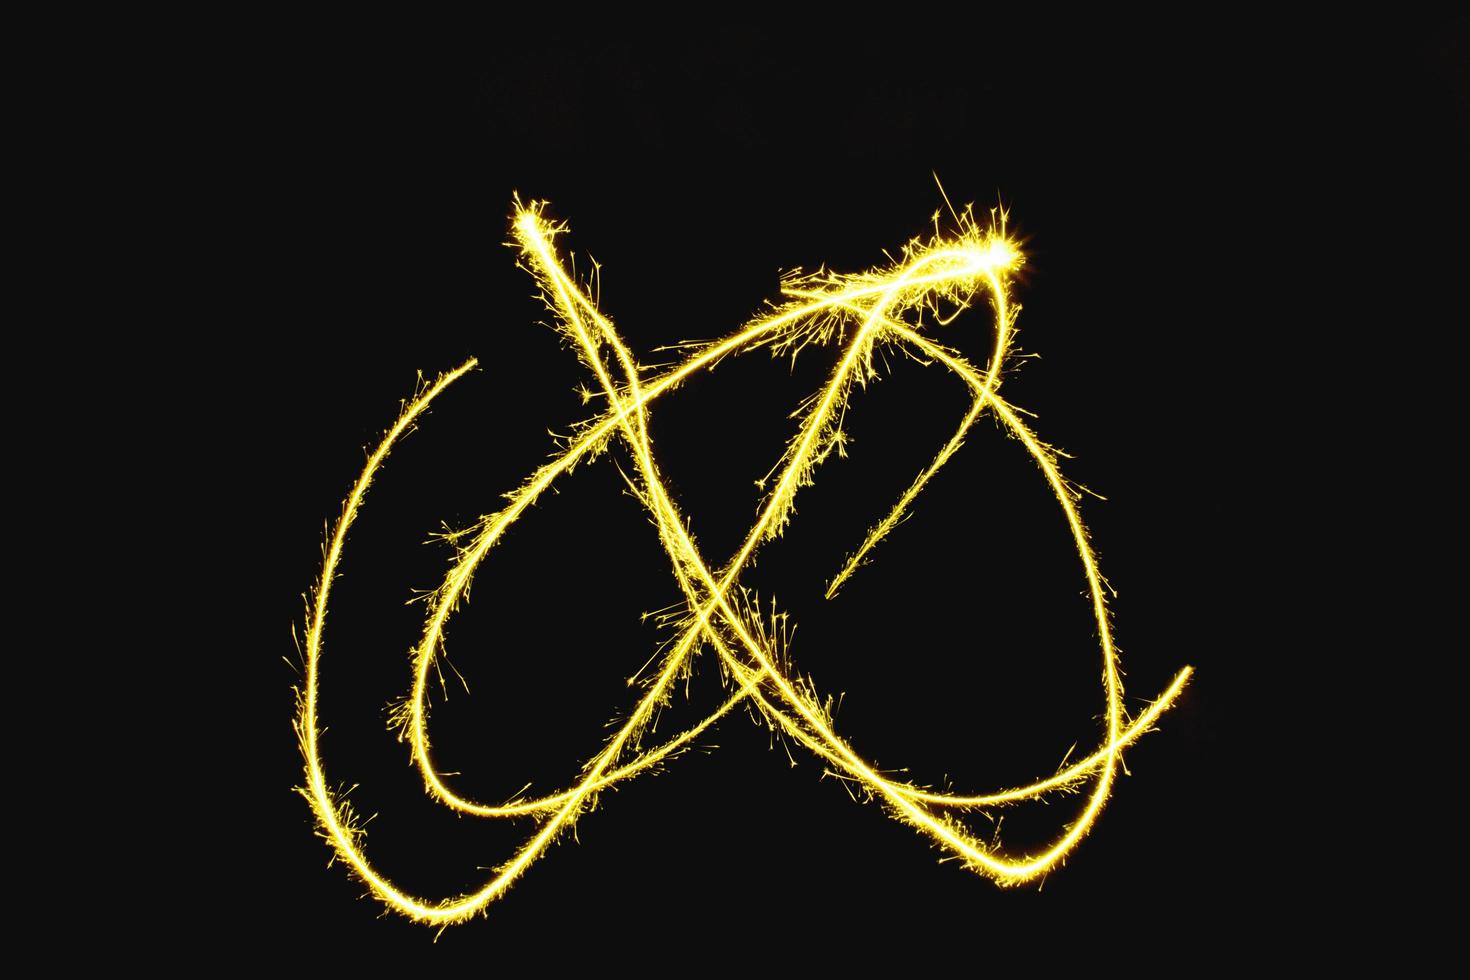 abstract curve gold yellow sparkler overlays texture elegant surface pattern on black. photo